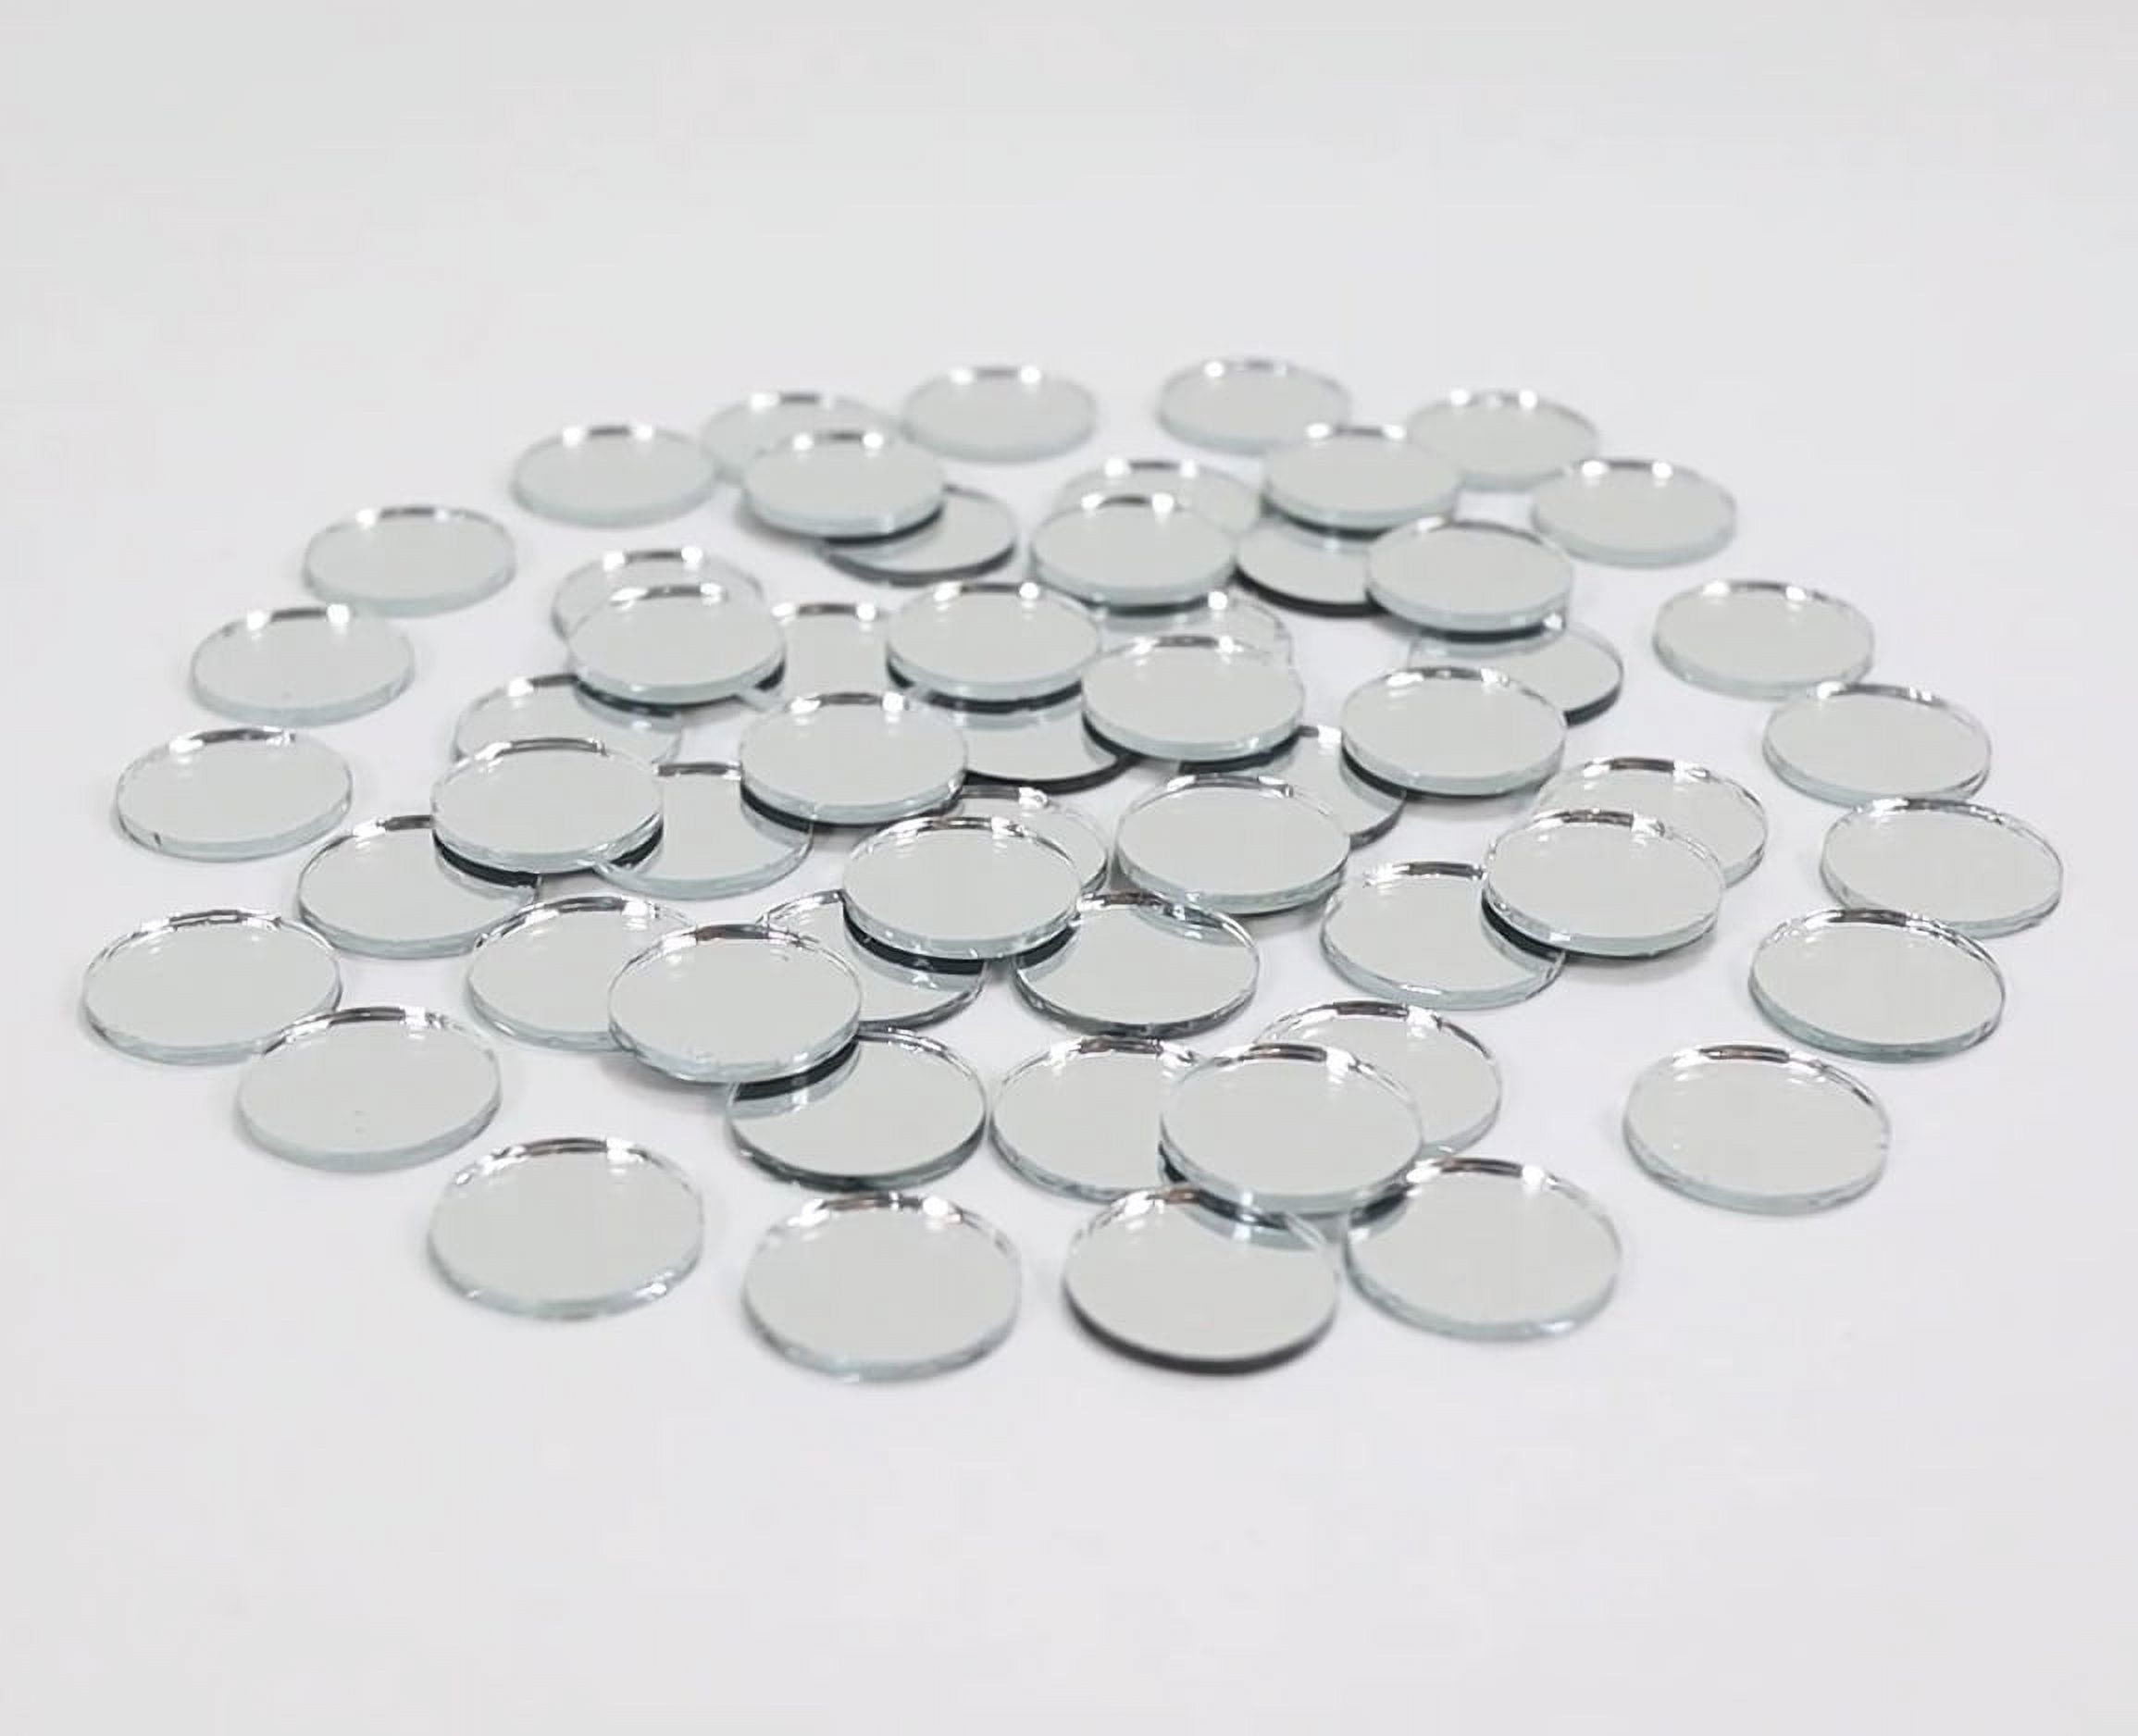 Small Glass Oval Craft Mirrors Bulk 100 Pieces Mirror Mosaic Tiles 22x10mm